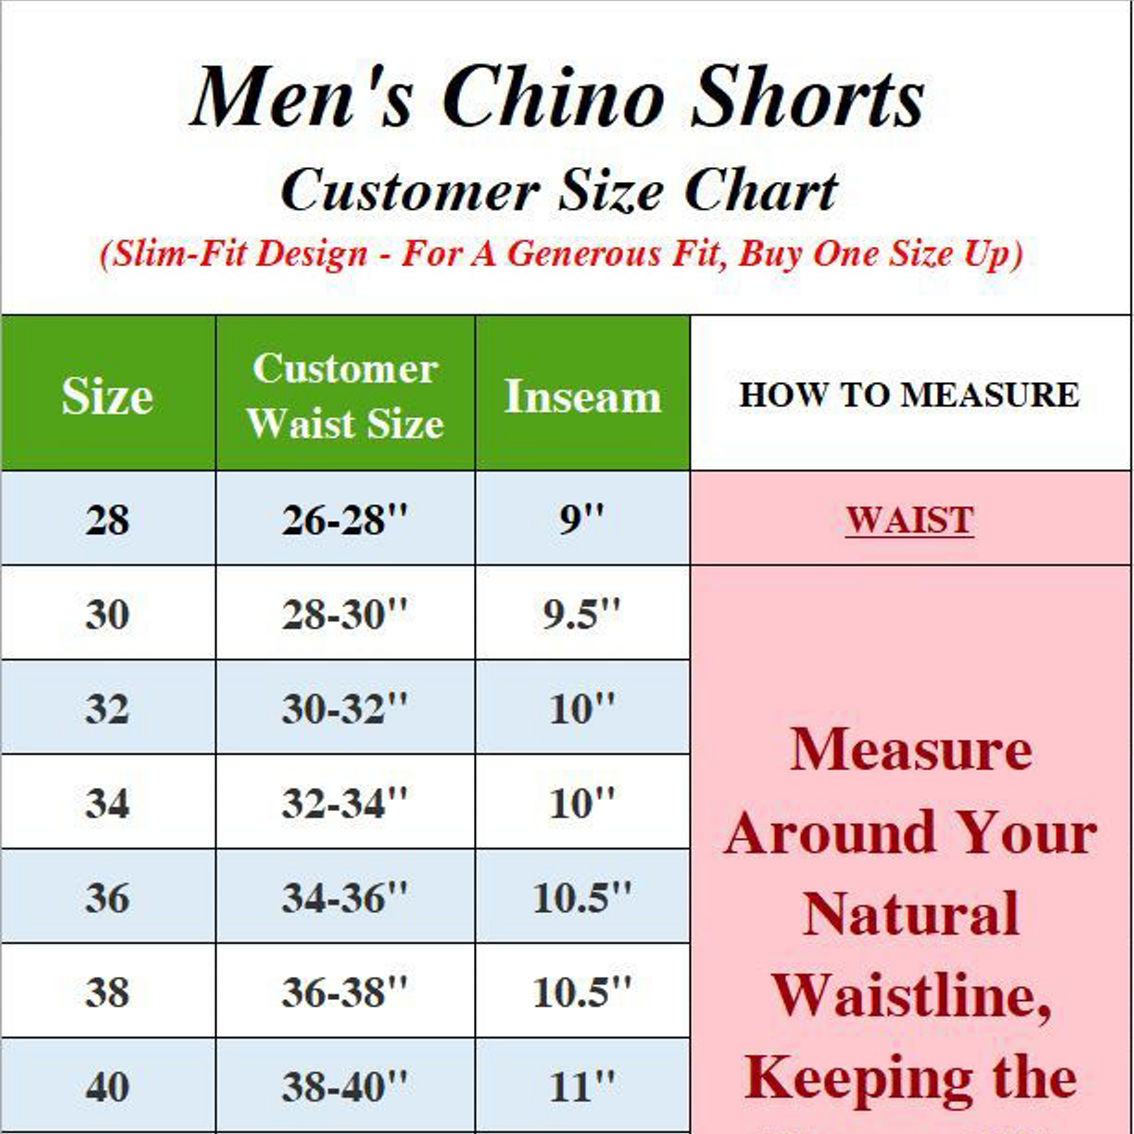 Men's Cotton Stretch Slim Fit Chino Shorts - Image 2 of 2